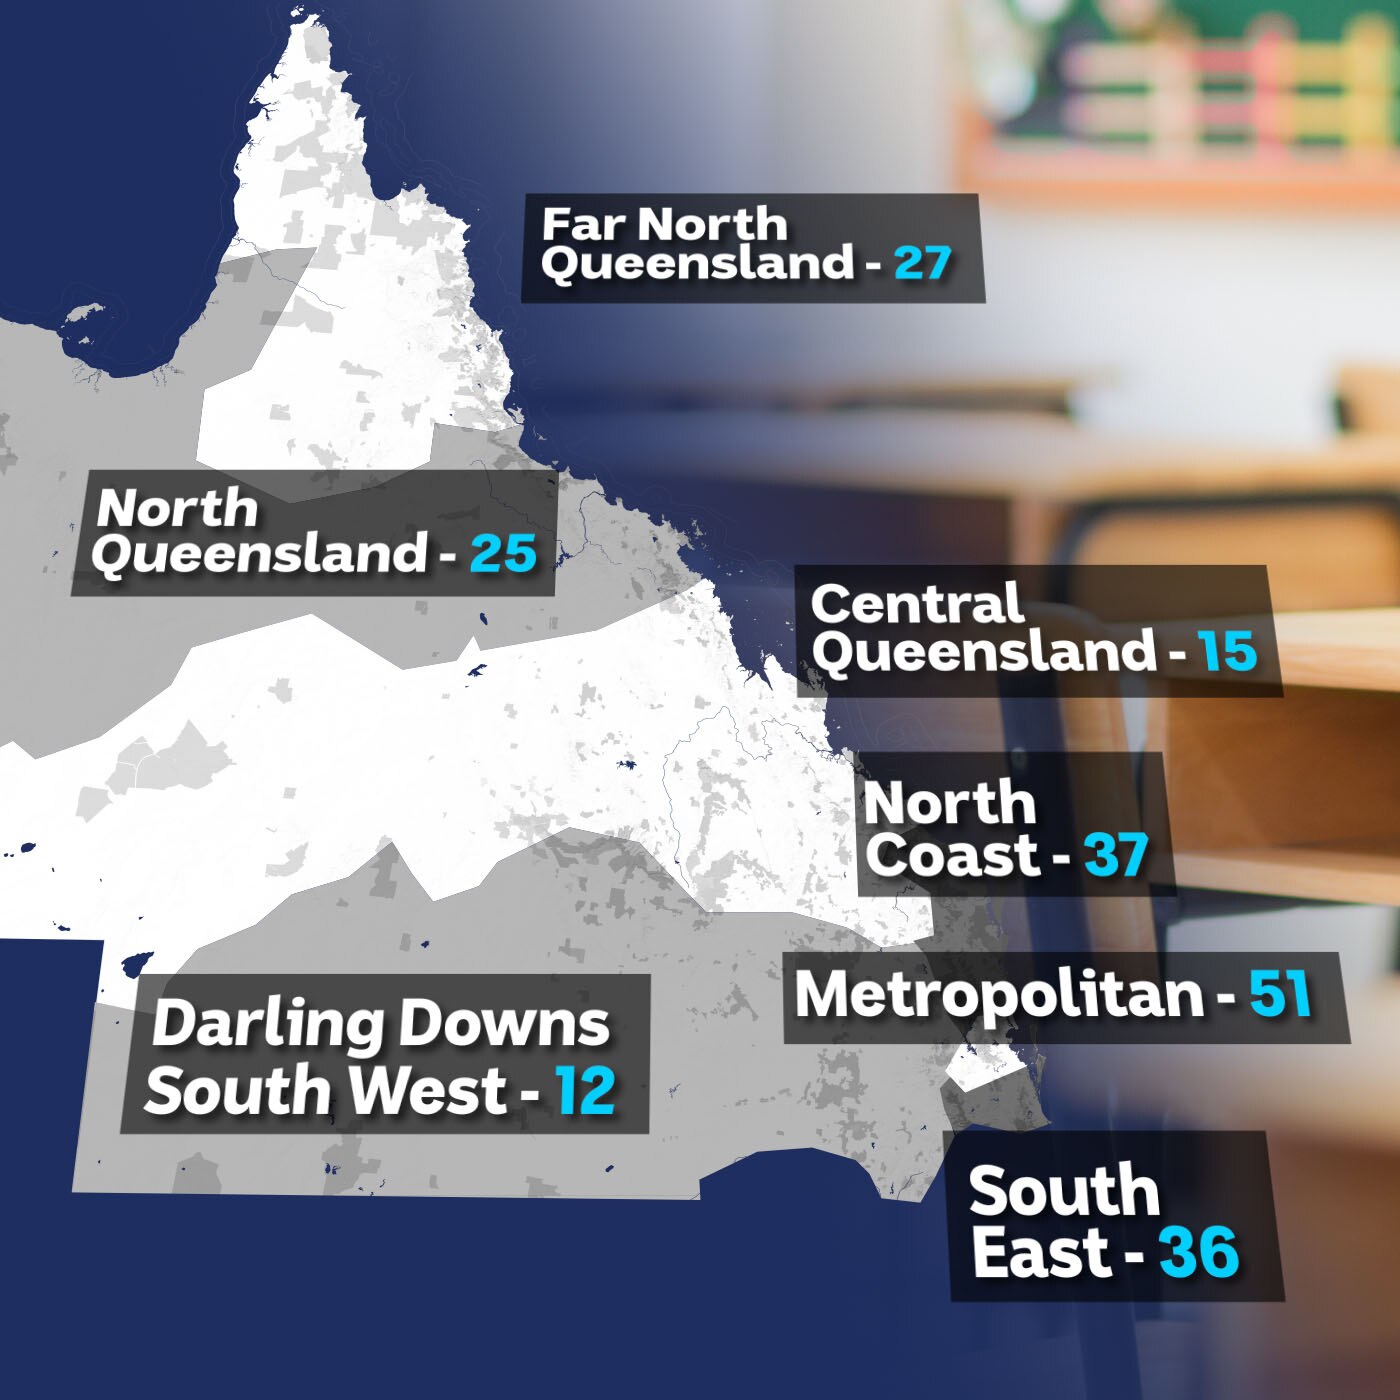 Misconduct stats QLD: FNQ 27, North QLD 25, Central QLD 15, North Coast 37. Darling Downs South West 12, Metro 51, South East 36